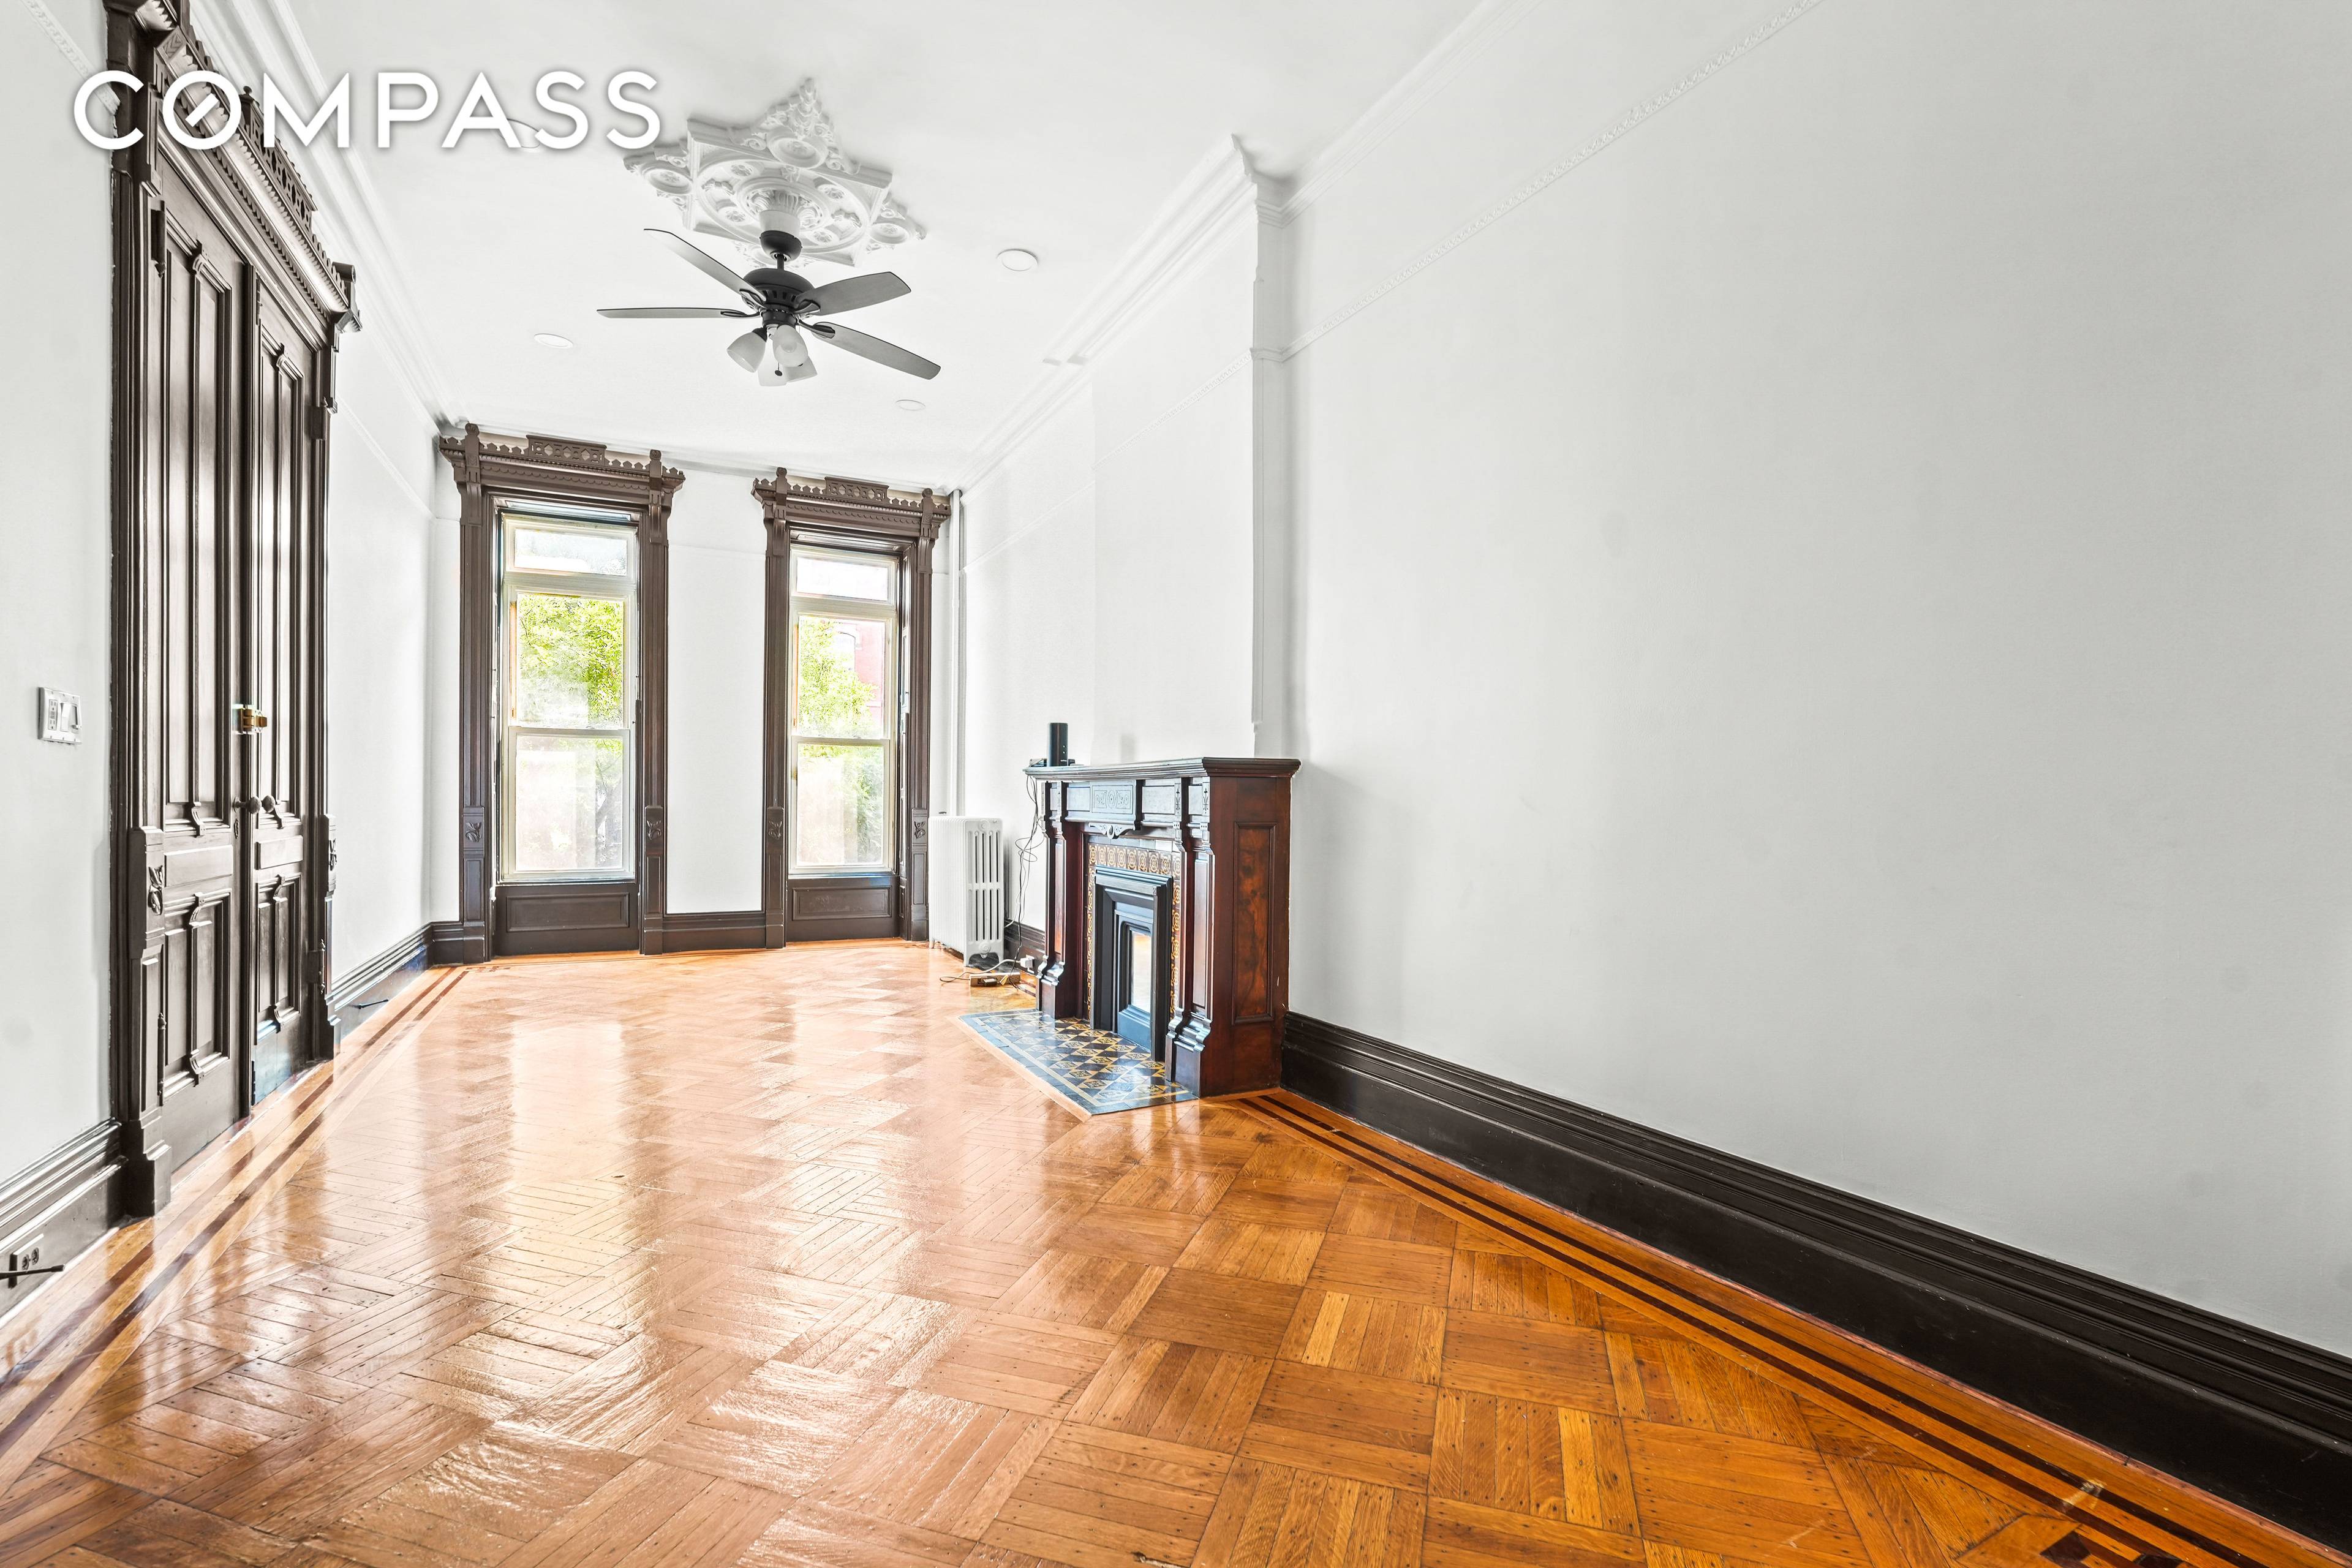 2 BEDROOM DUPLEX WITH BACKYARD IN HISTORIC BED STUY FREE WI FI This beautifully renovated, sunny and clean duplex is located in the heart of Bed Stuy.